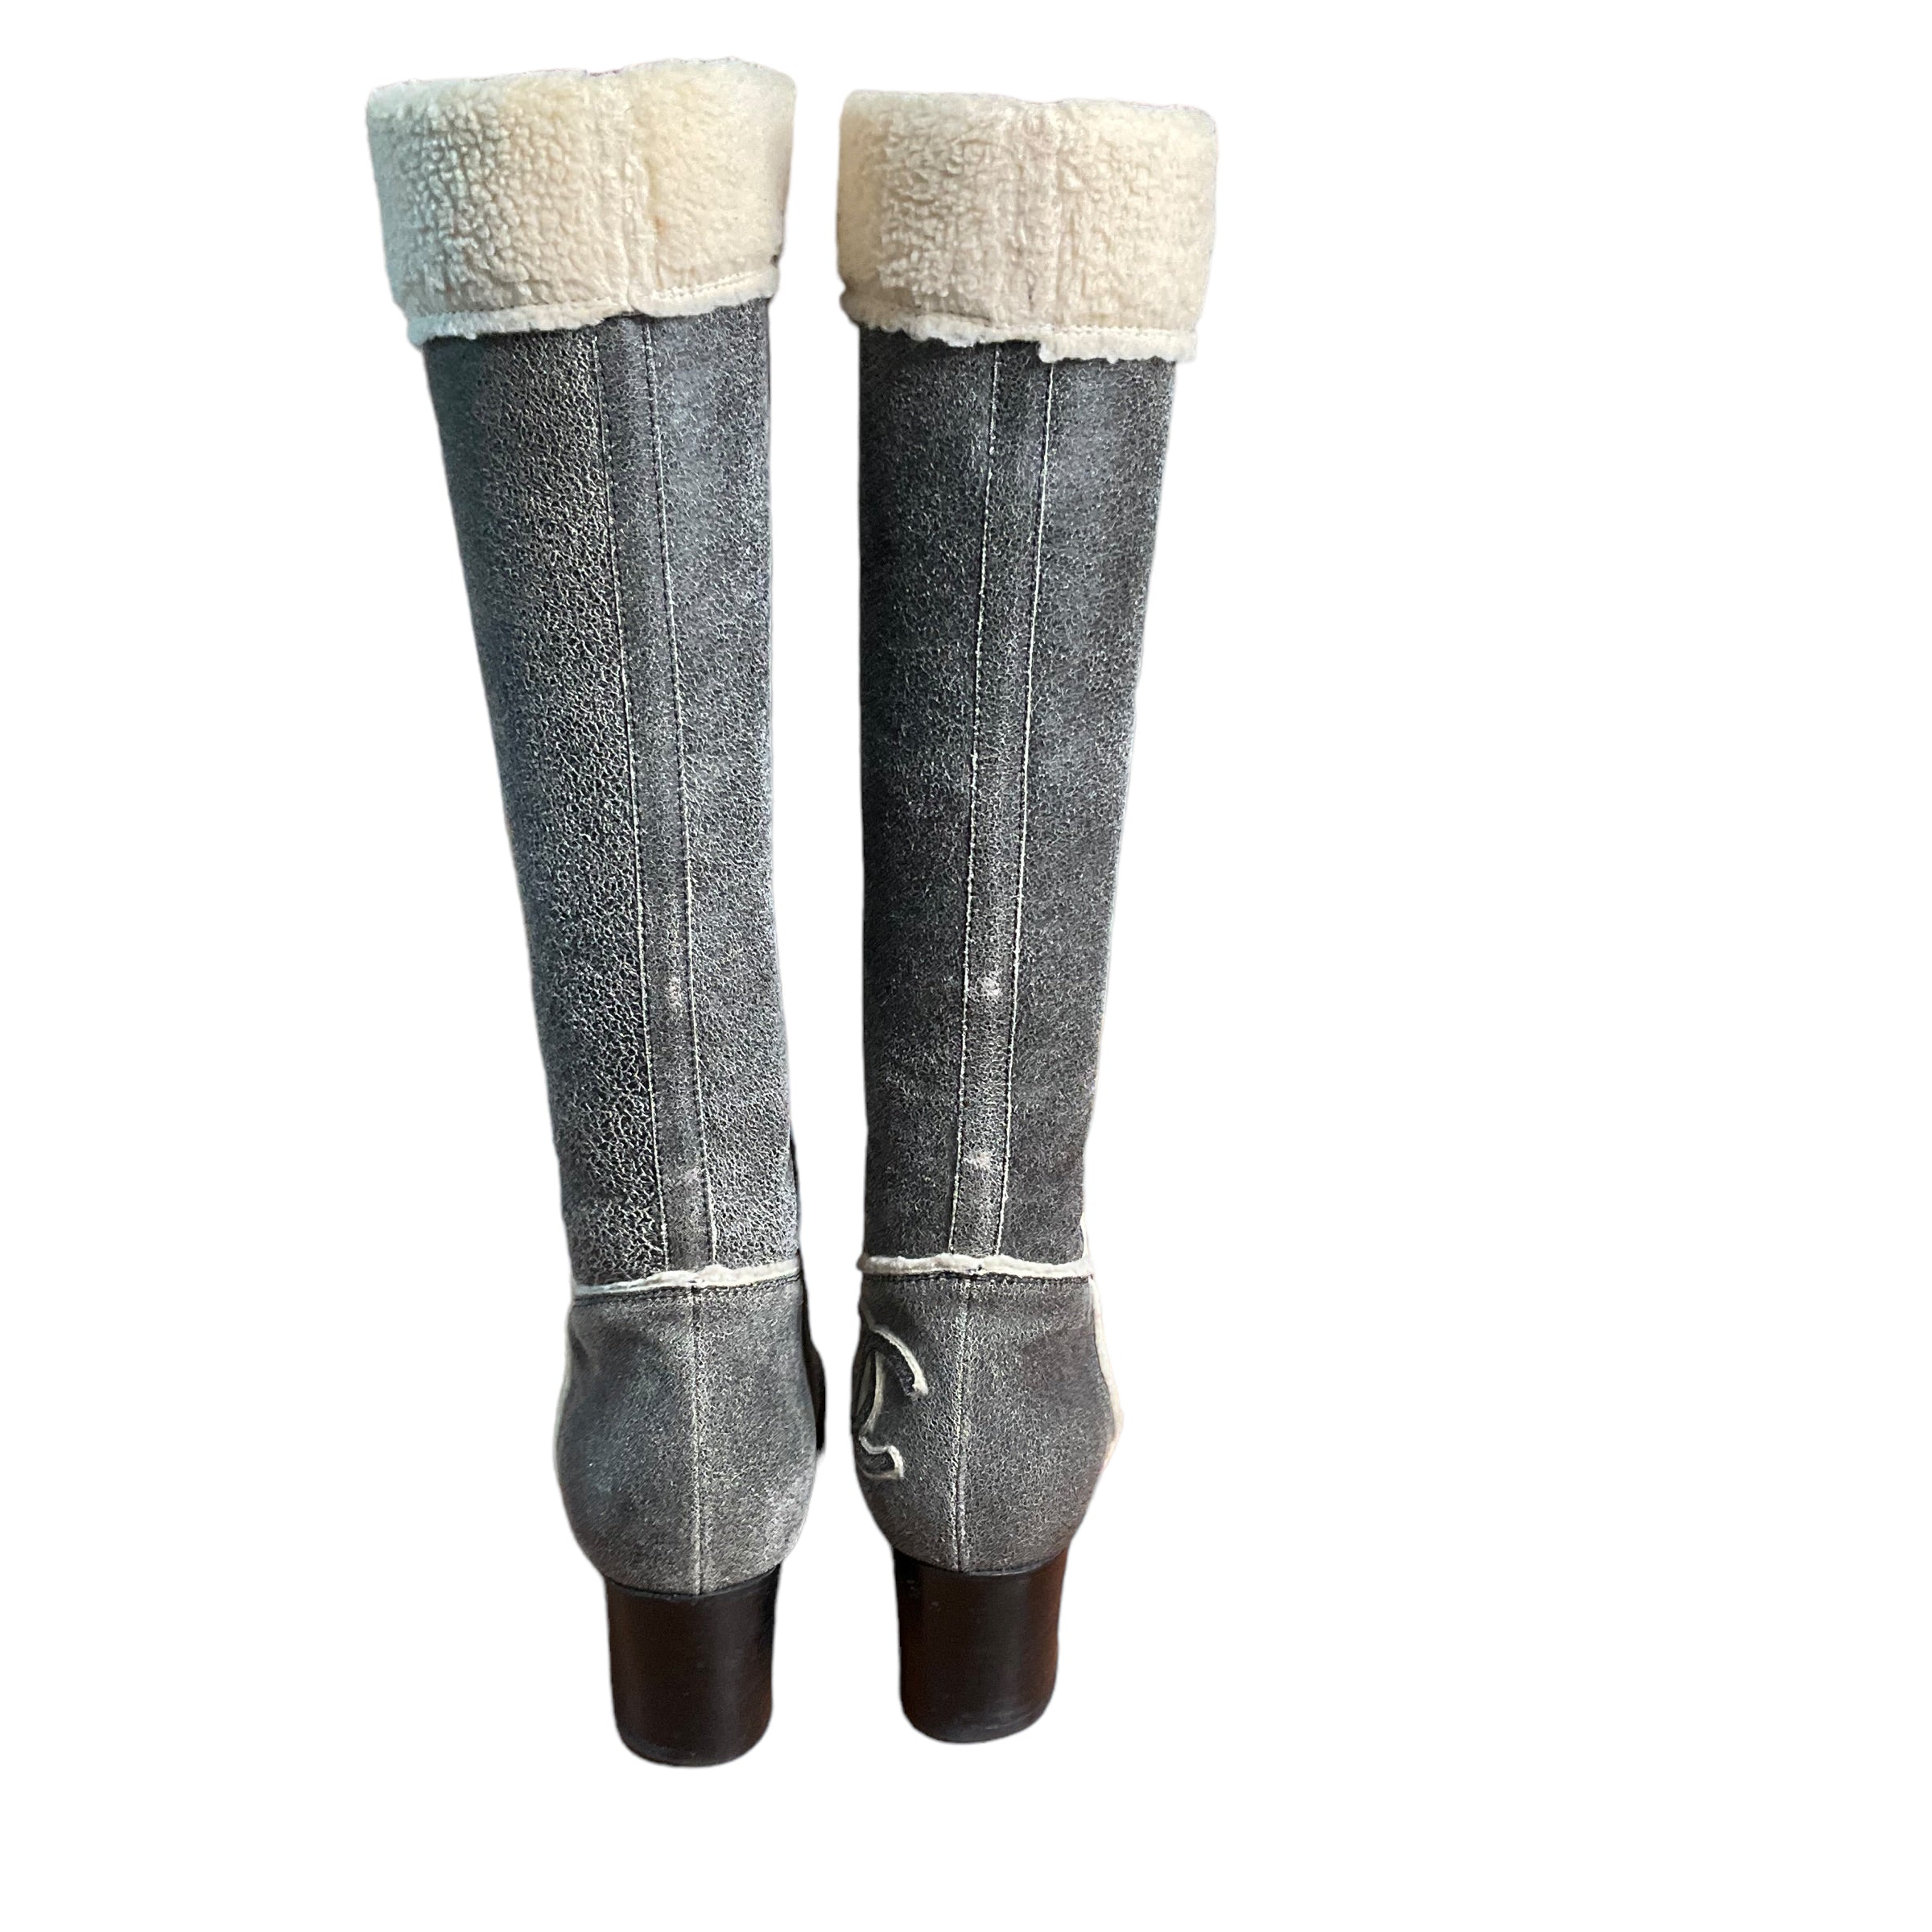 Chanel Shearling Boots. Size 38 – Chic To Chic Consignment